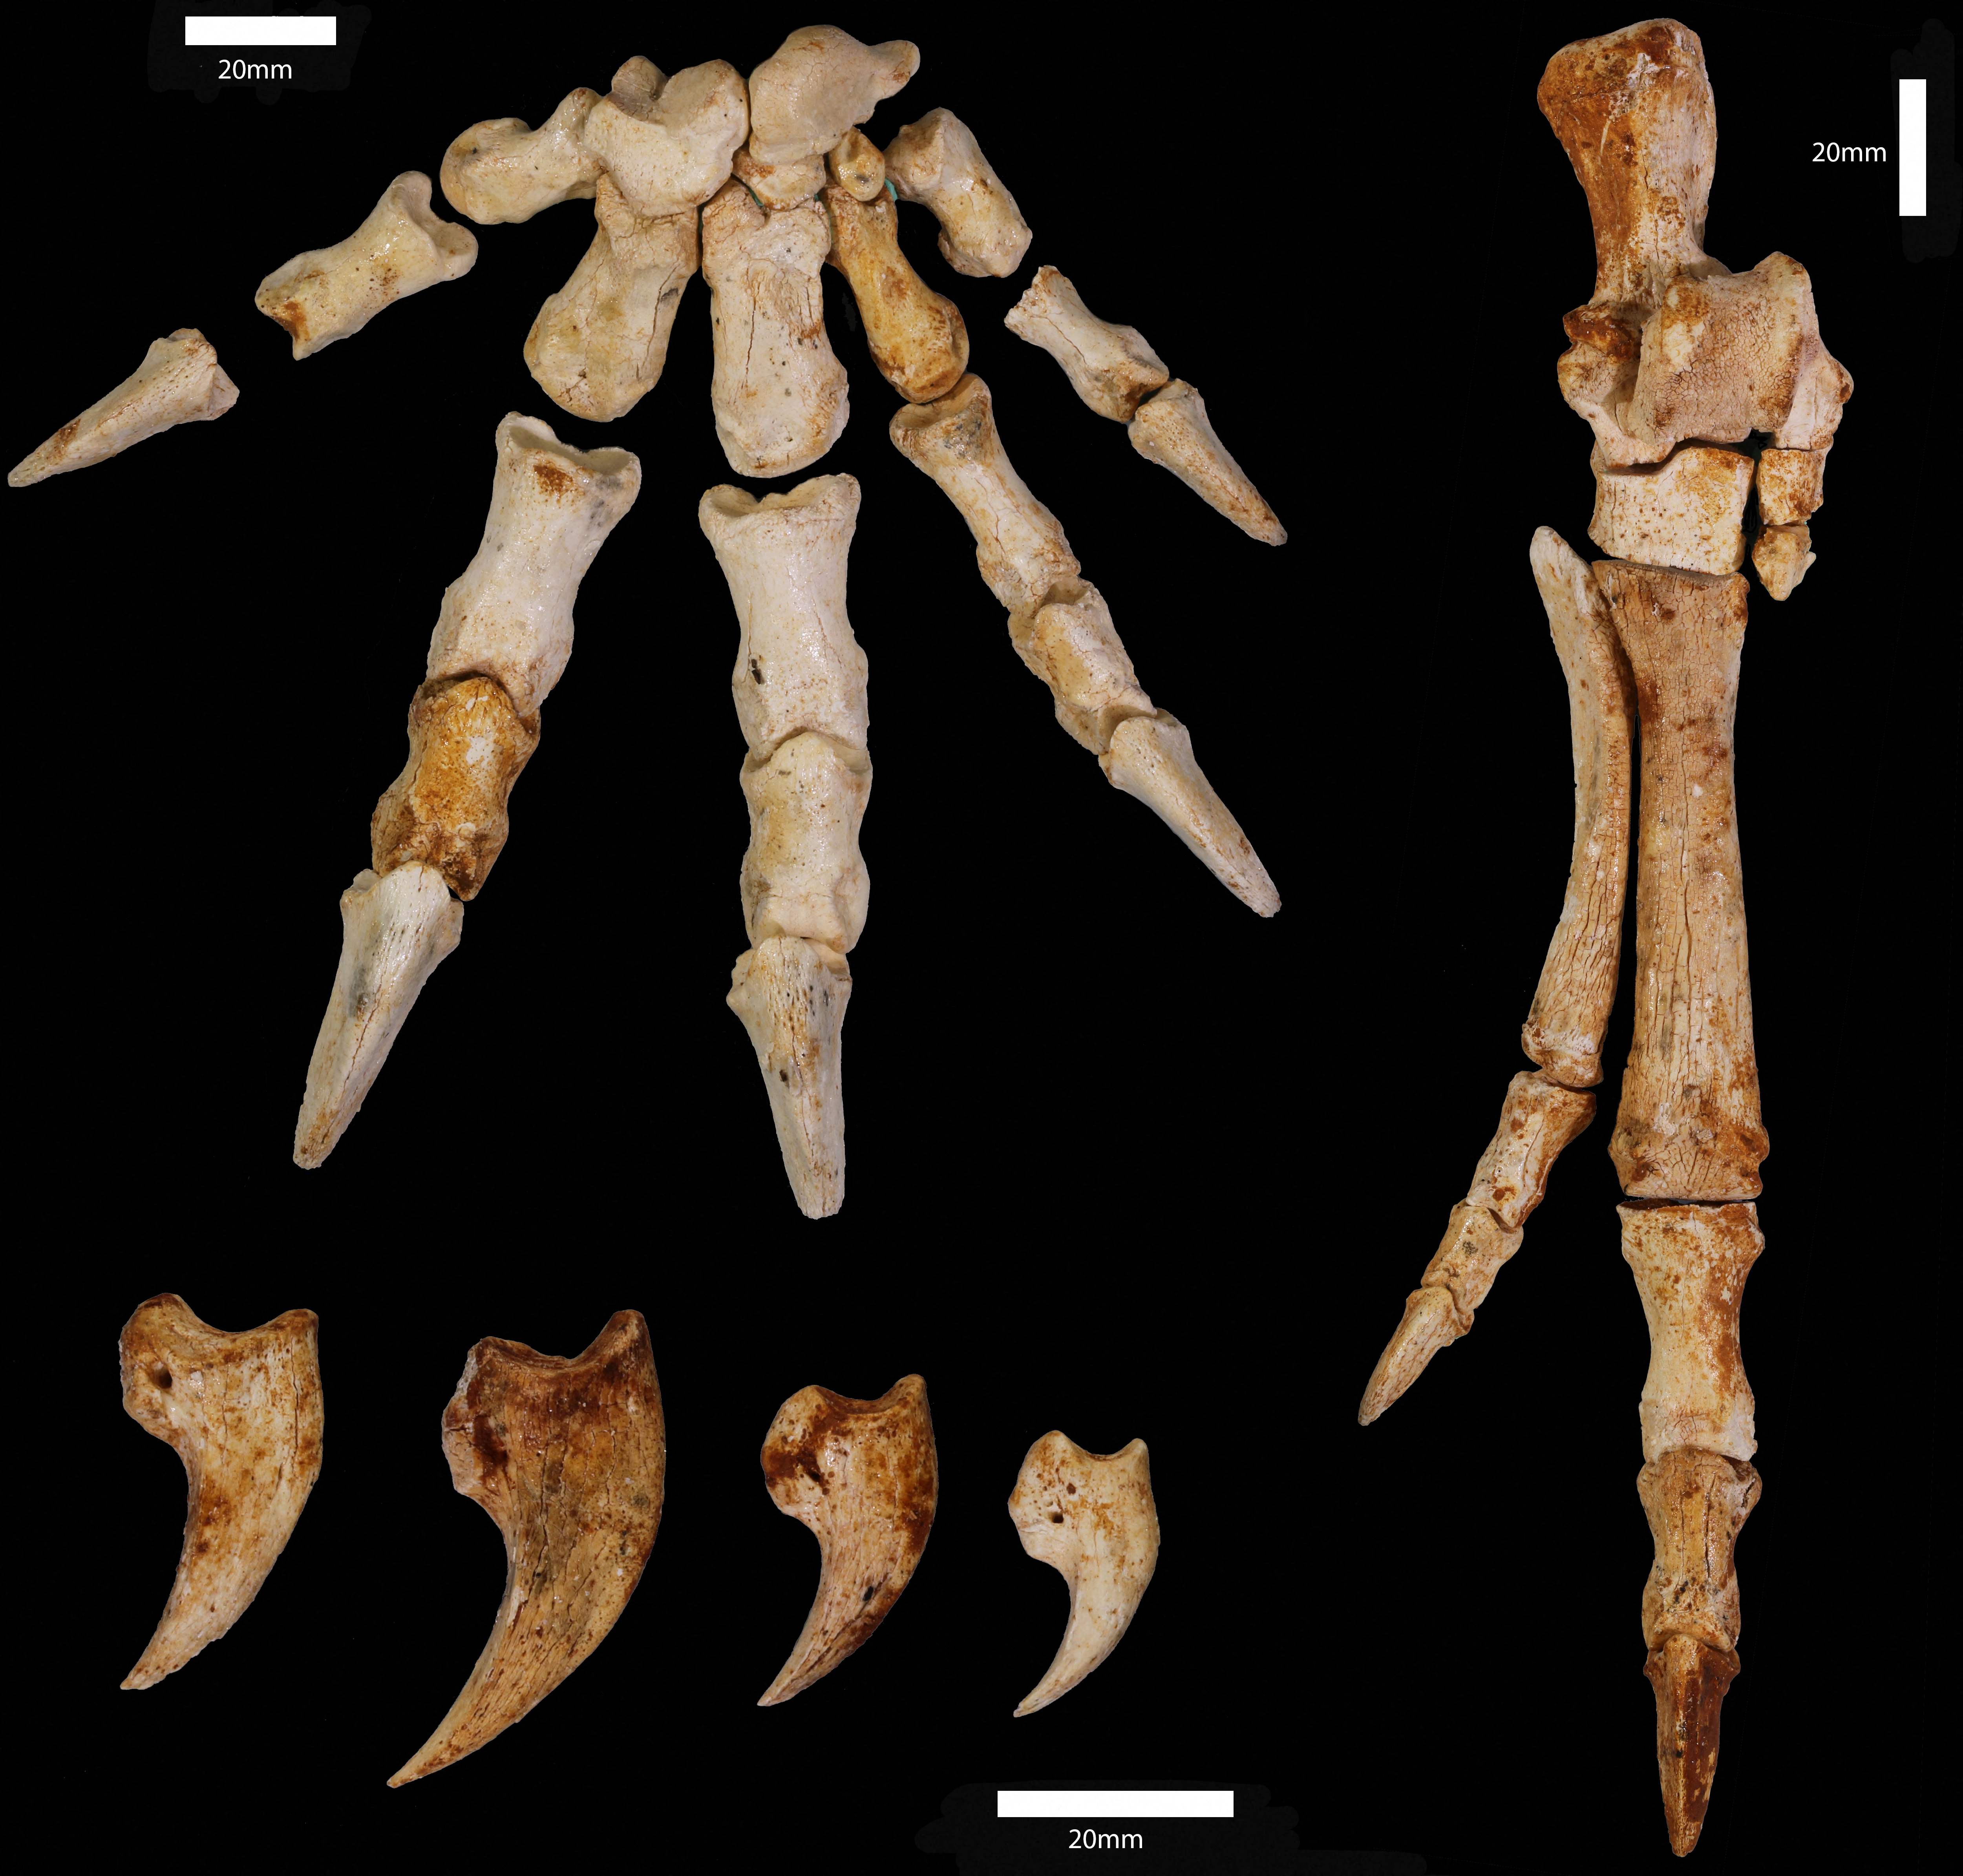 The fossil of a 40kg tree-climbing kangaroo from western Australia